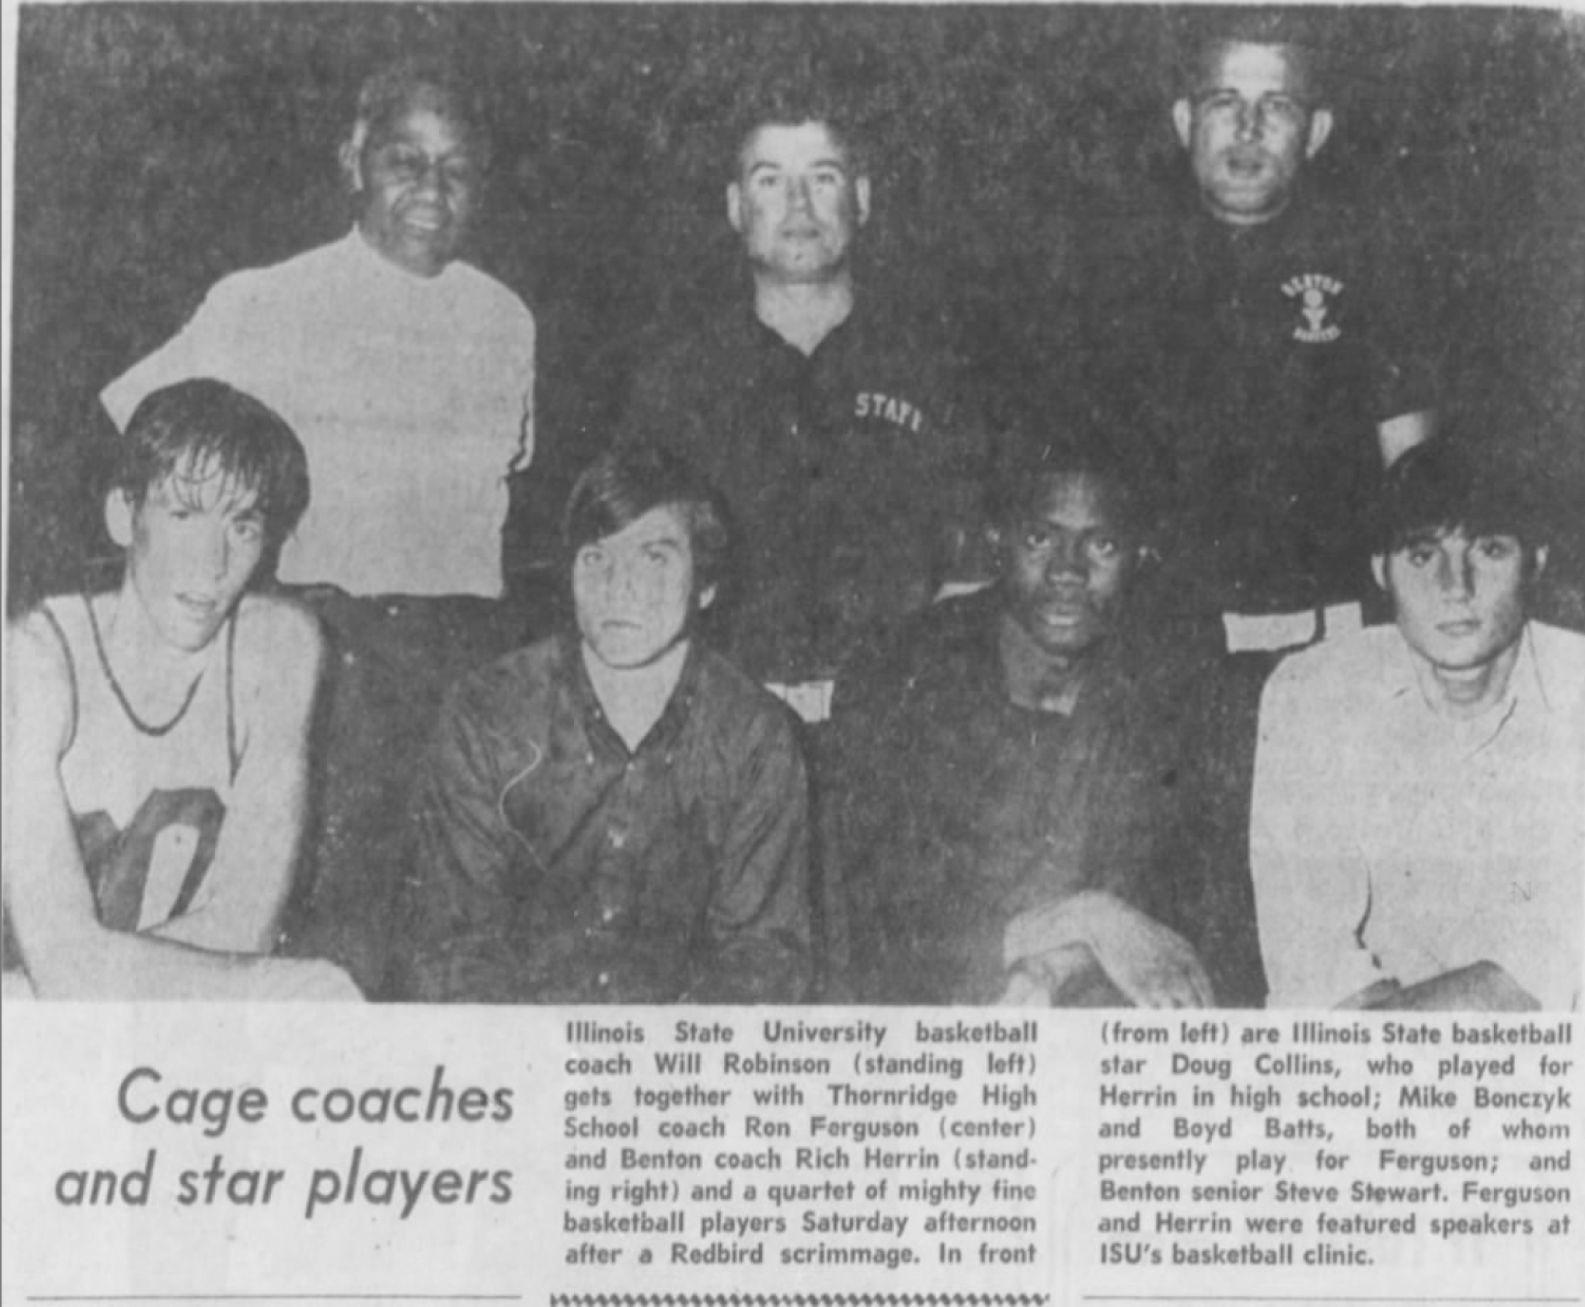 Cage coaches and star players